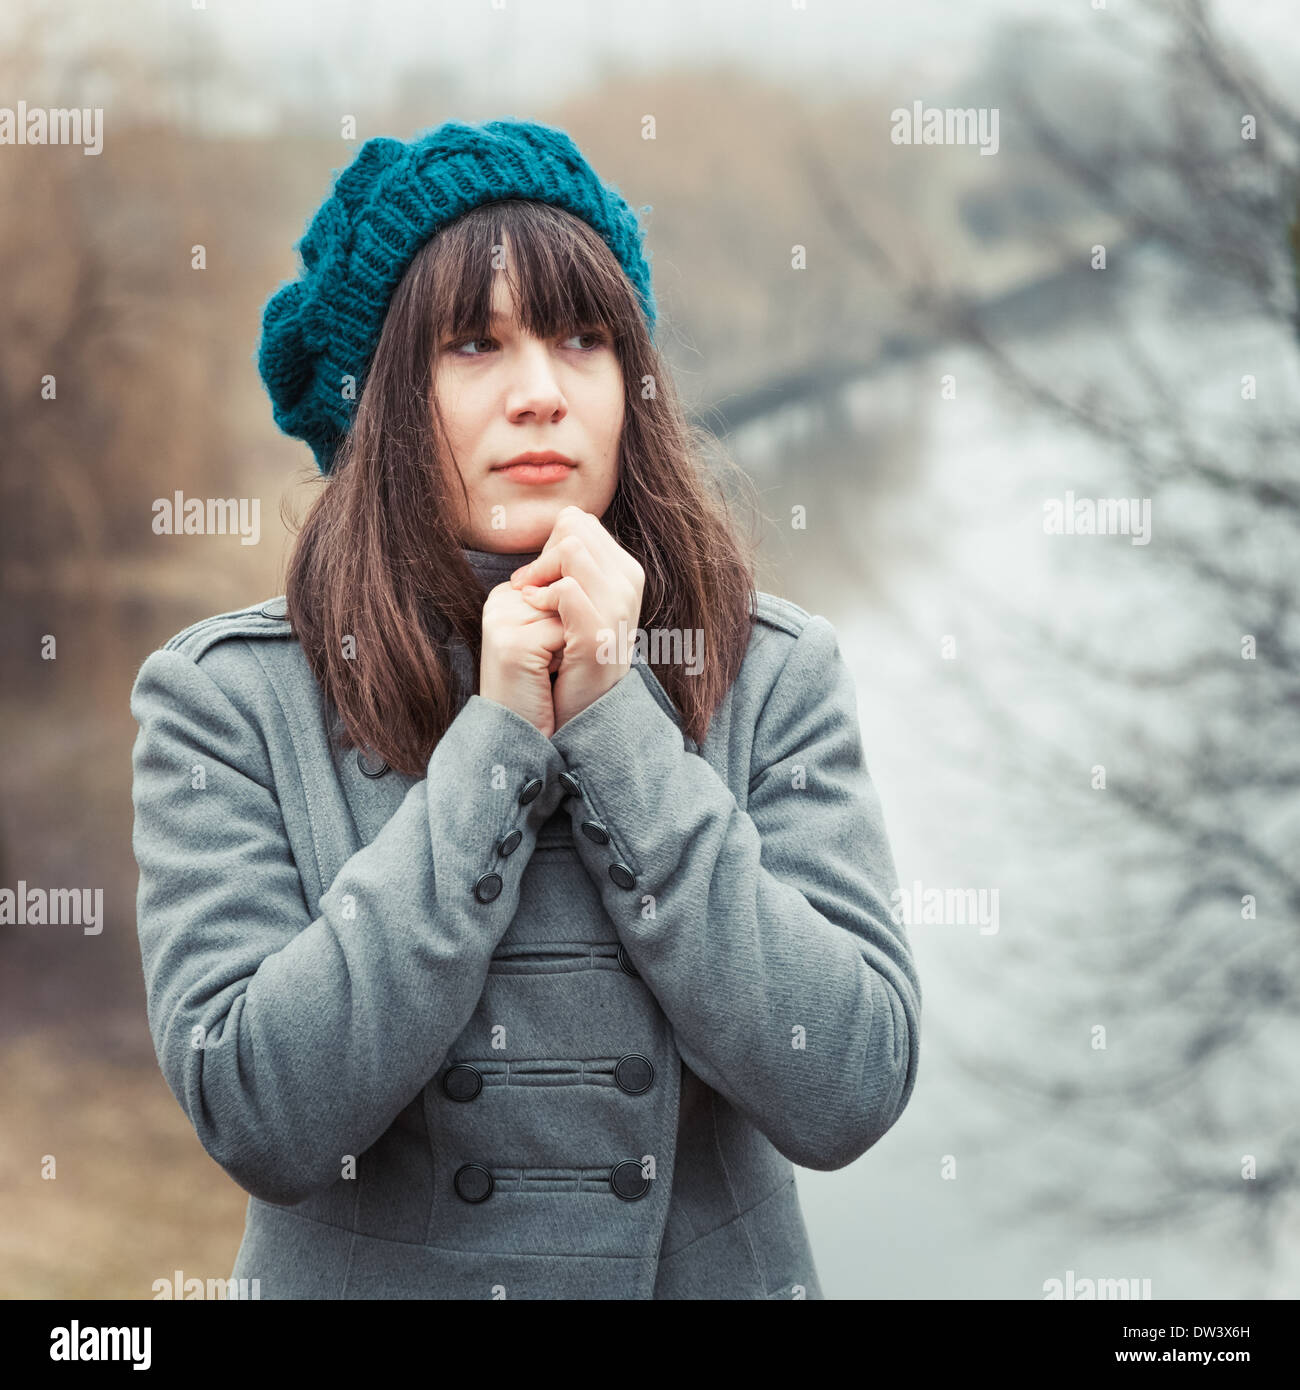 young pretty girl in cold weather in park outdoors, vintage portrait Stock Photo